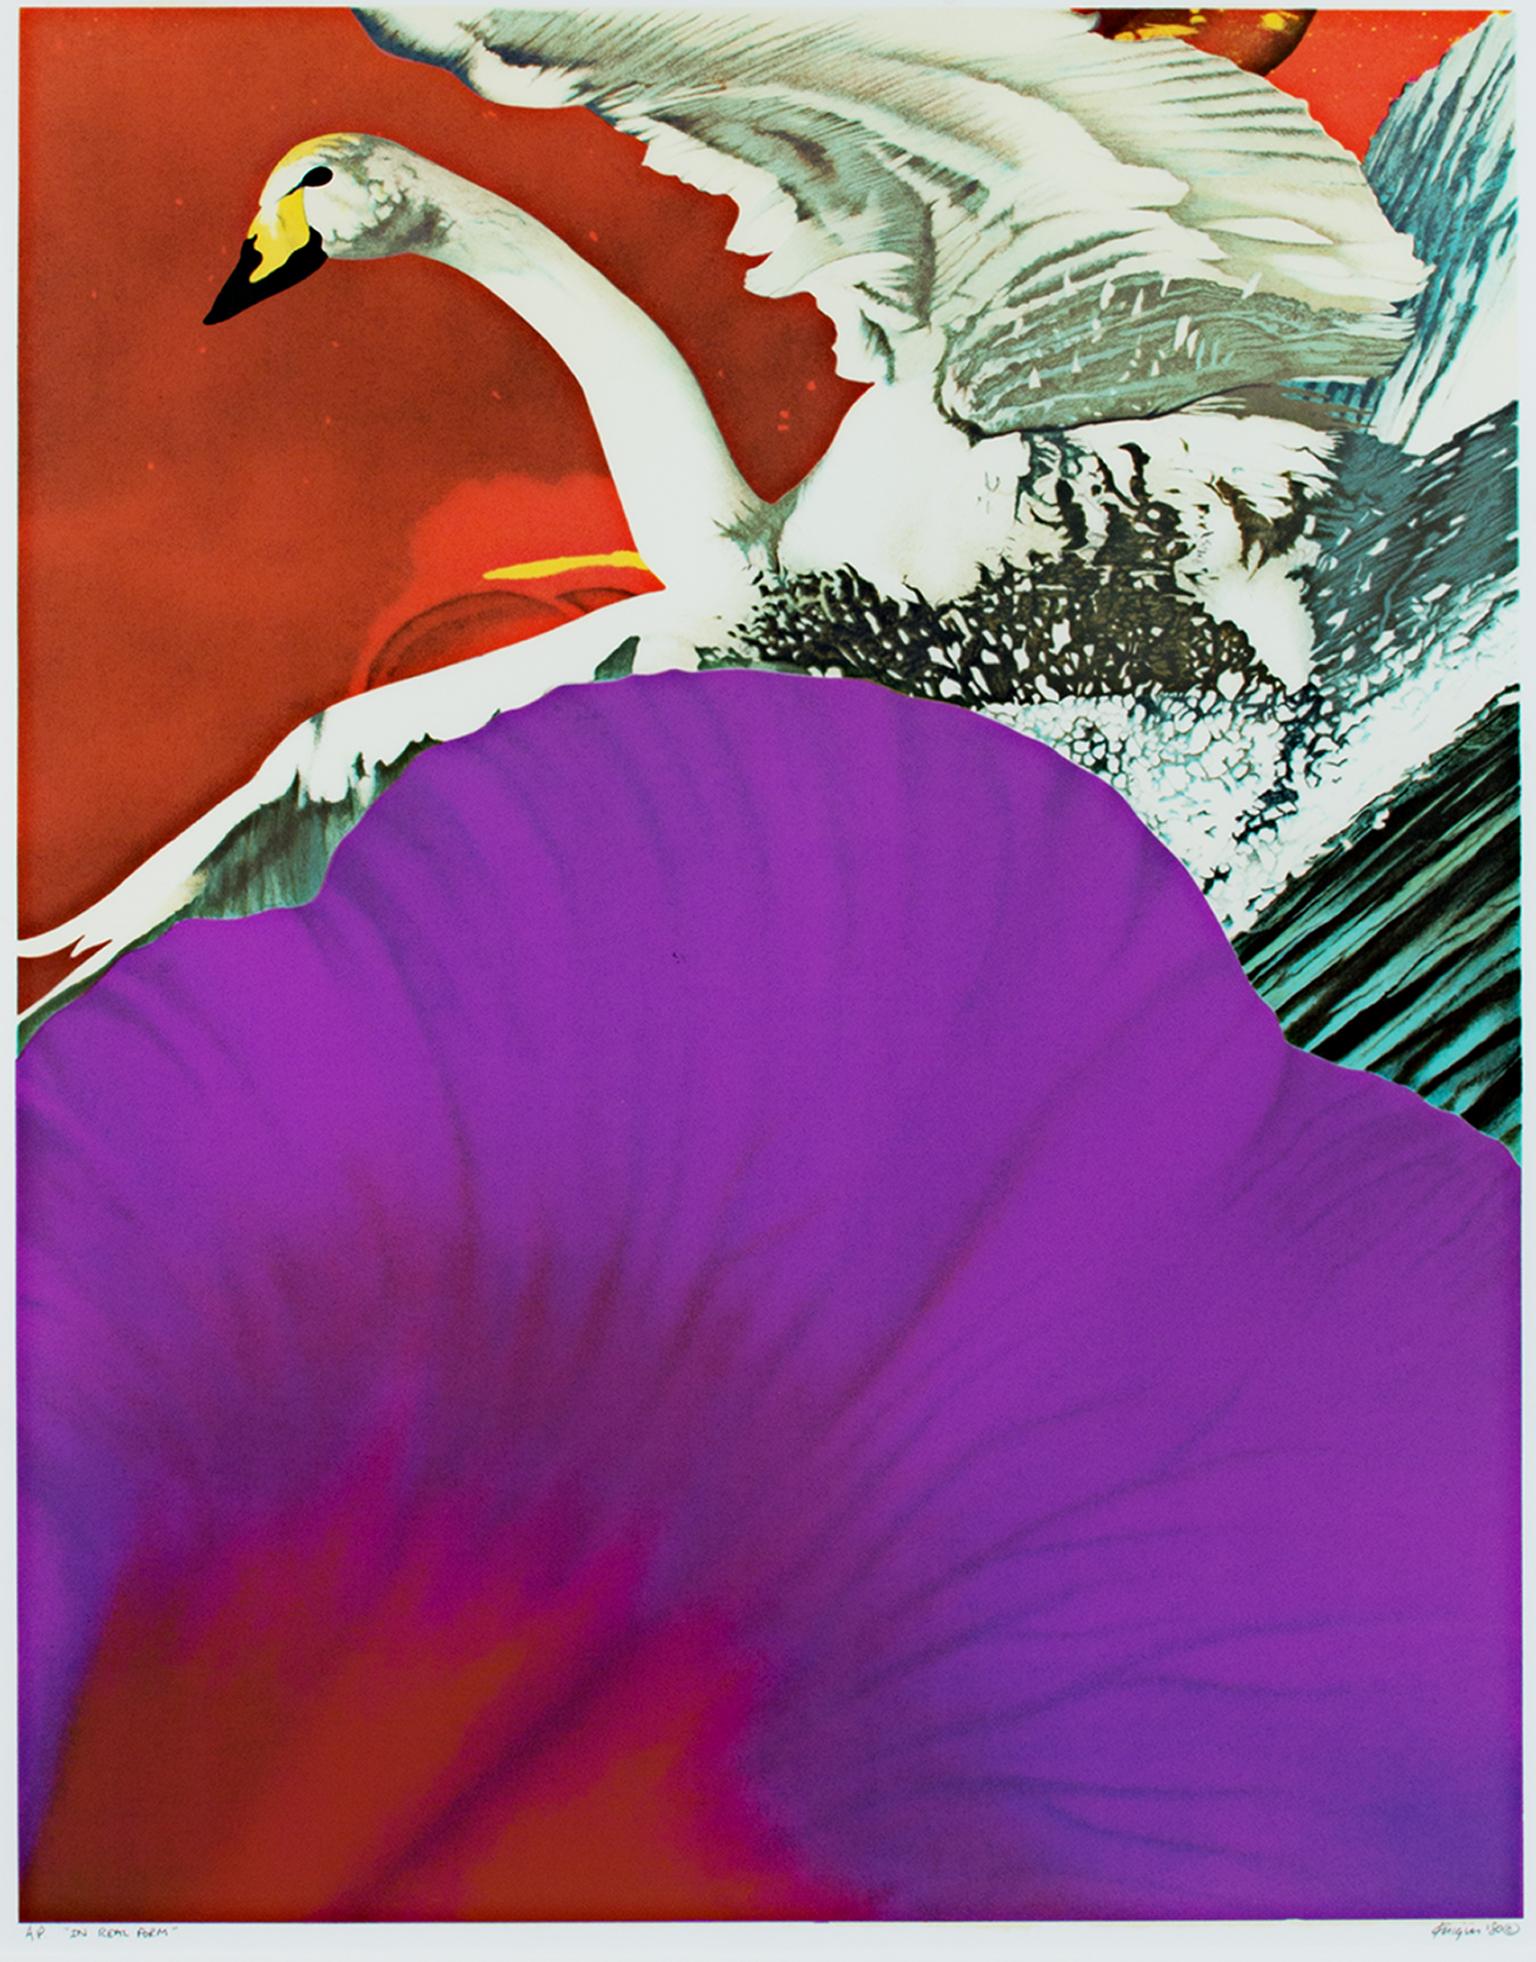 Michael Knigin Abstract Print - "In Real Form" signed original lithograph pop art realistic swan floral vibrant